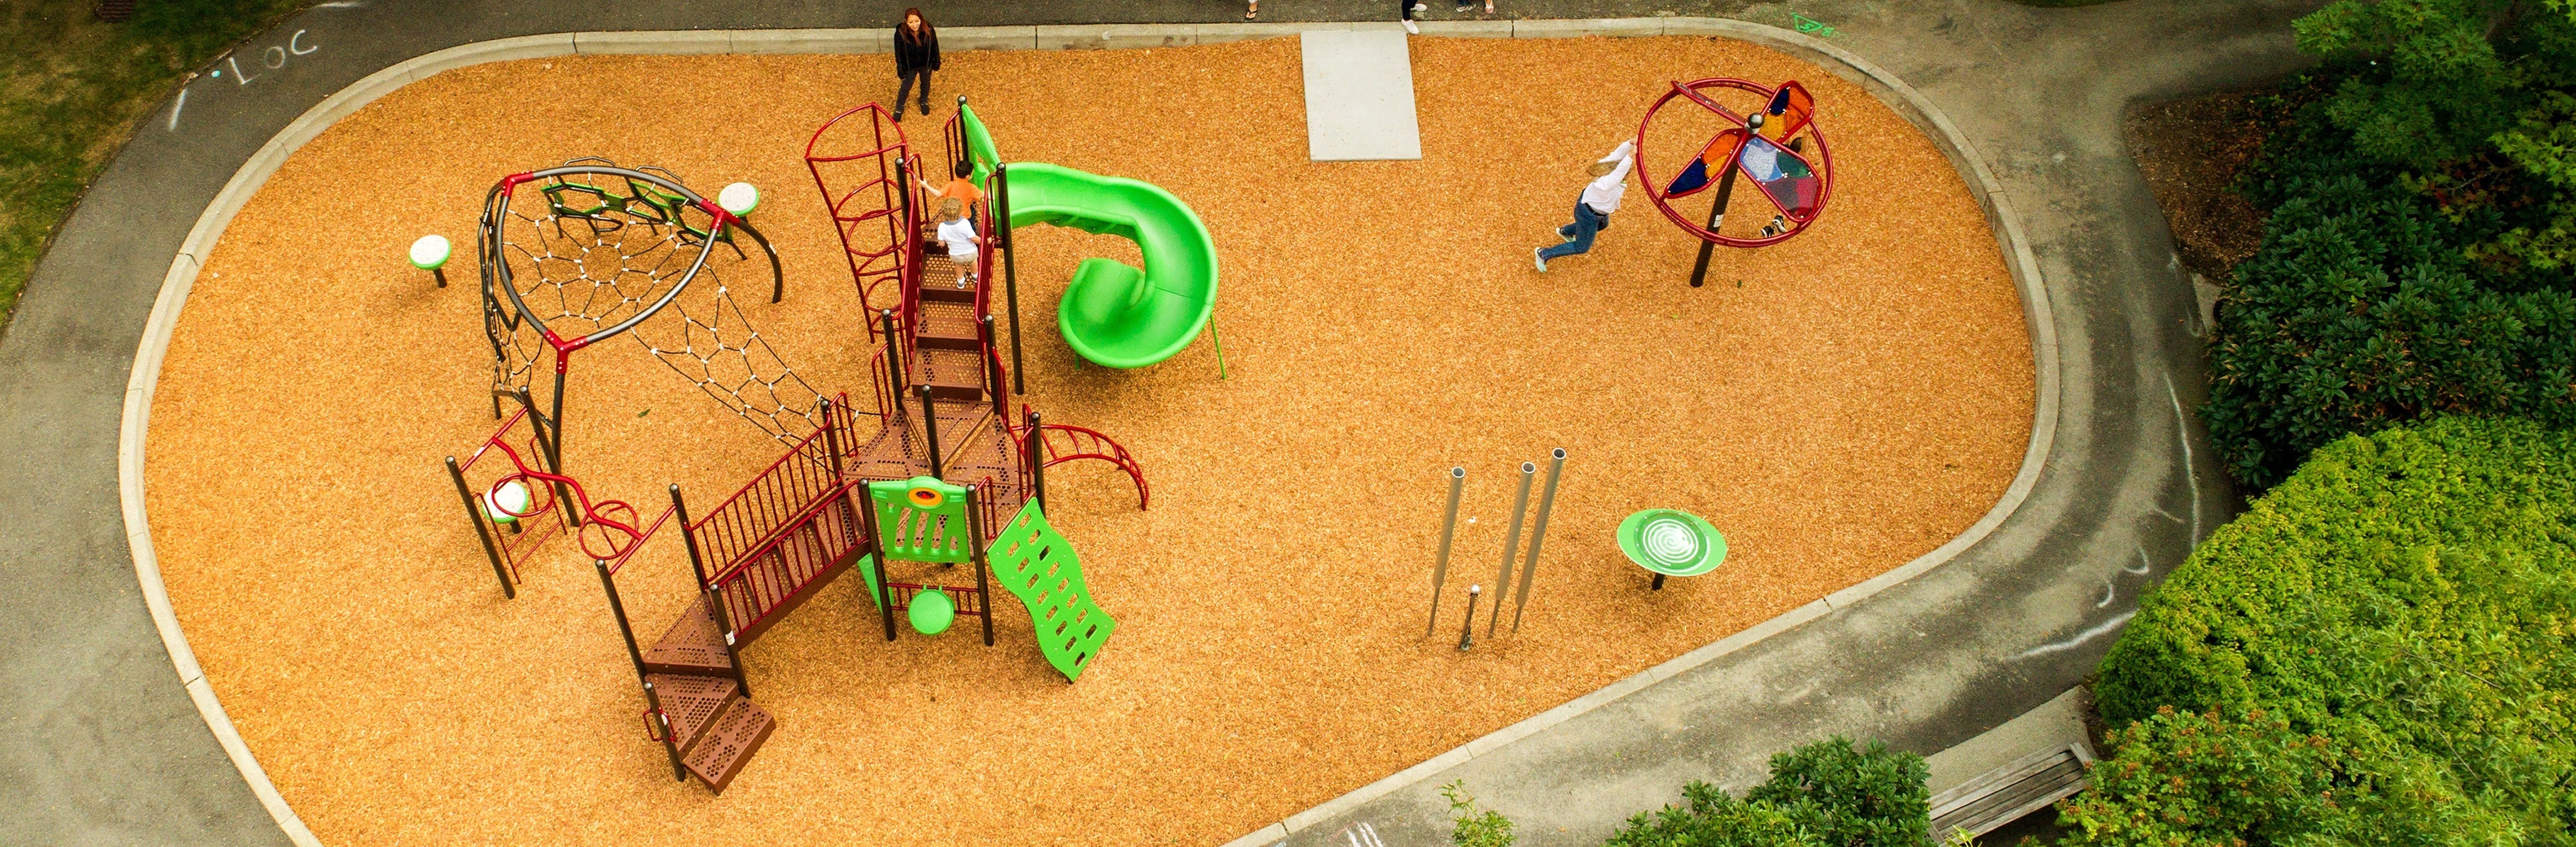 GameTime Funds 15 New Park Projects Throughout Ohio